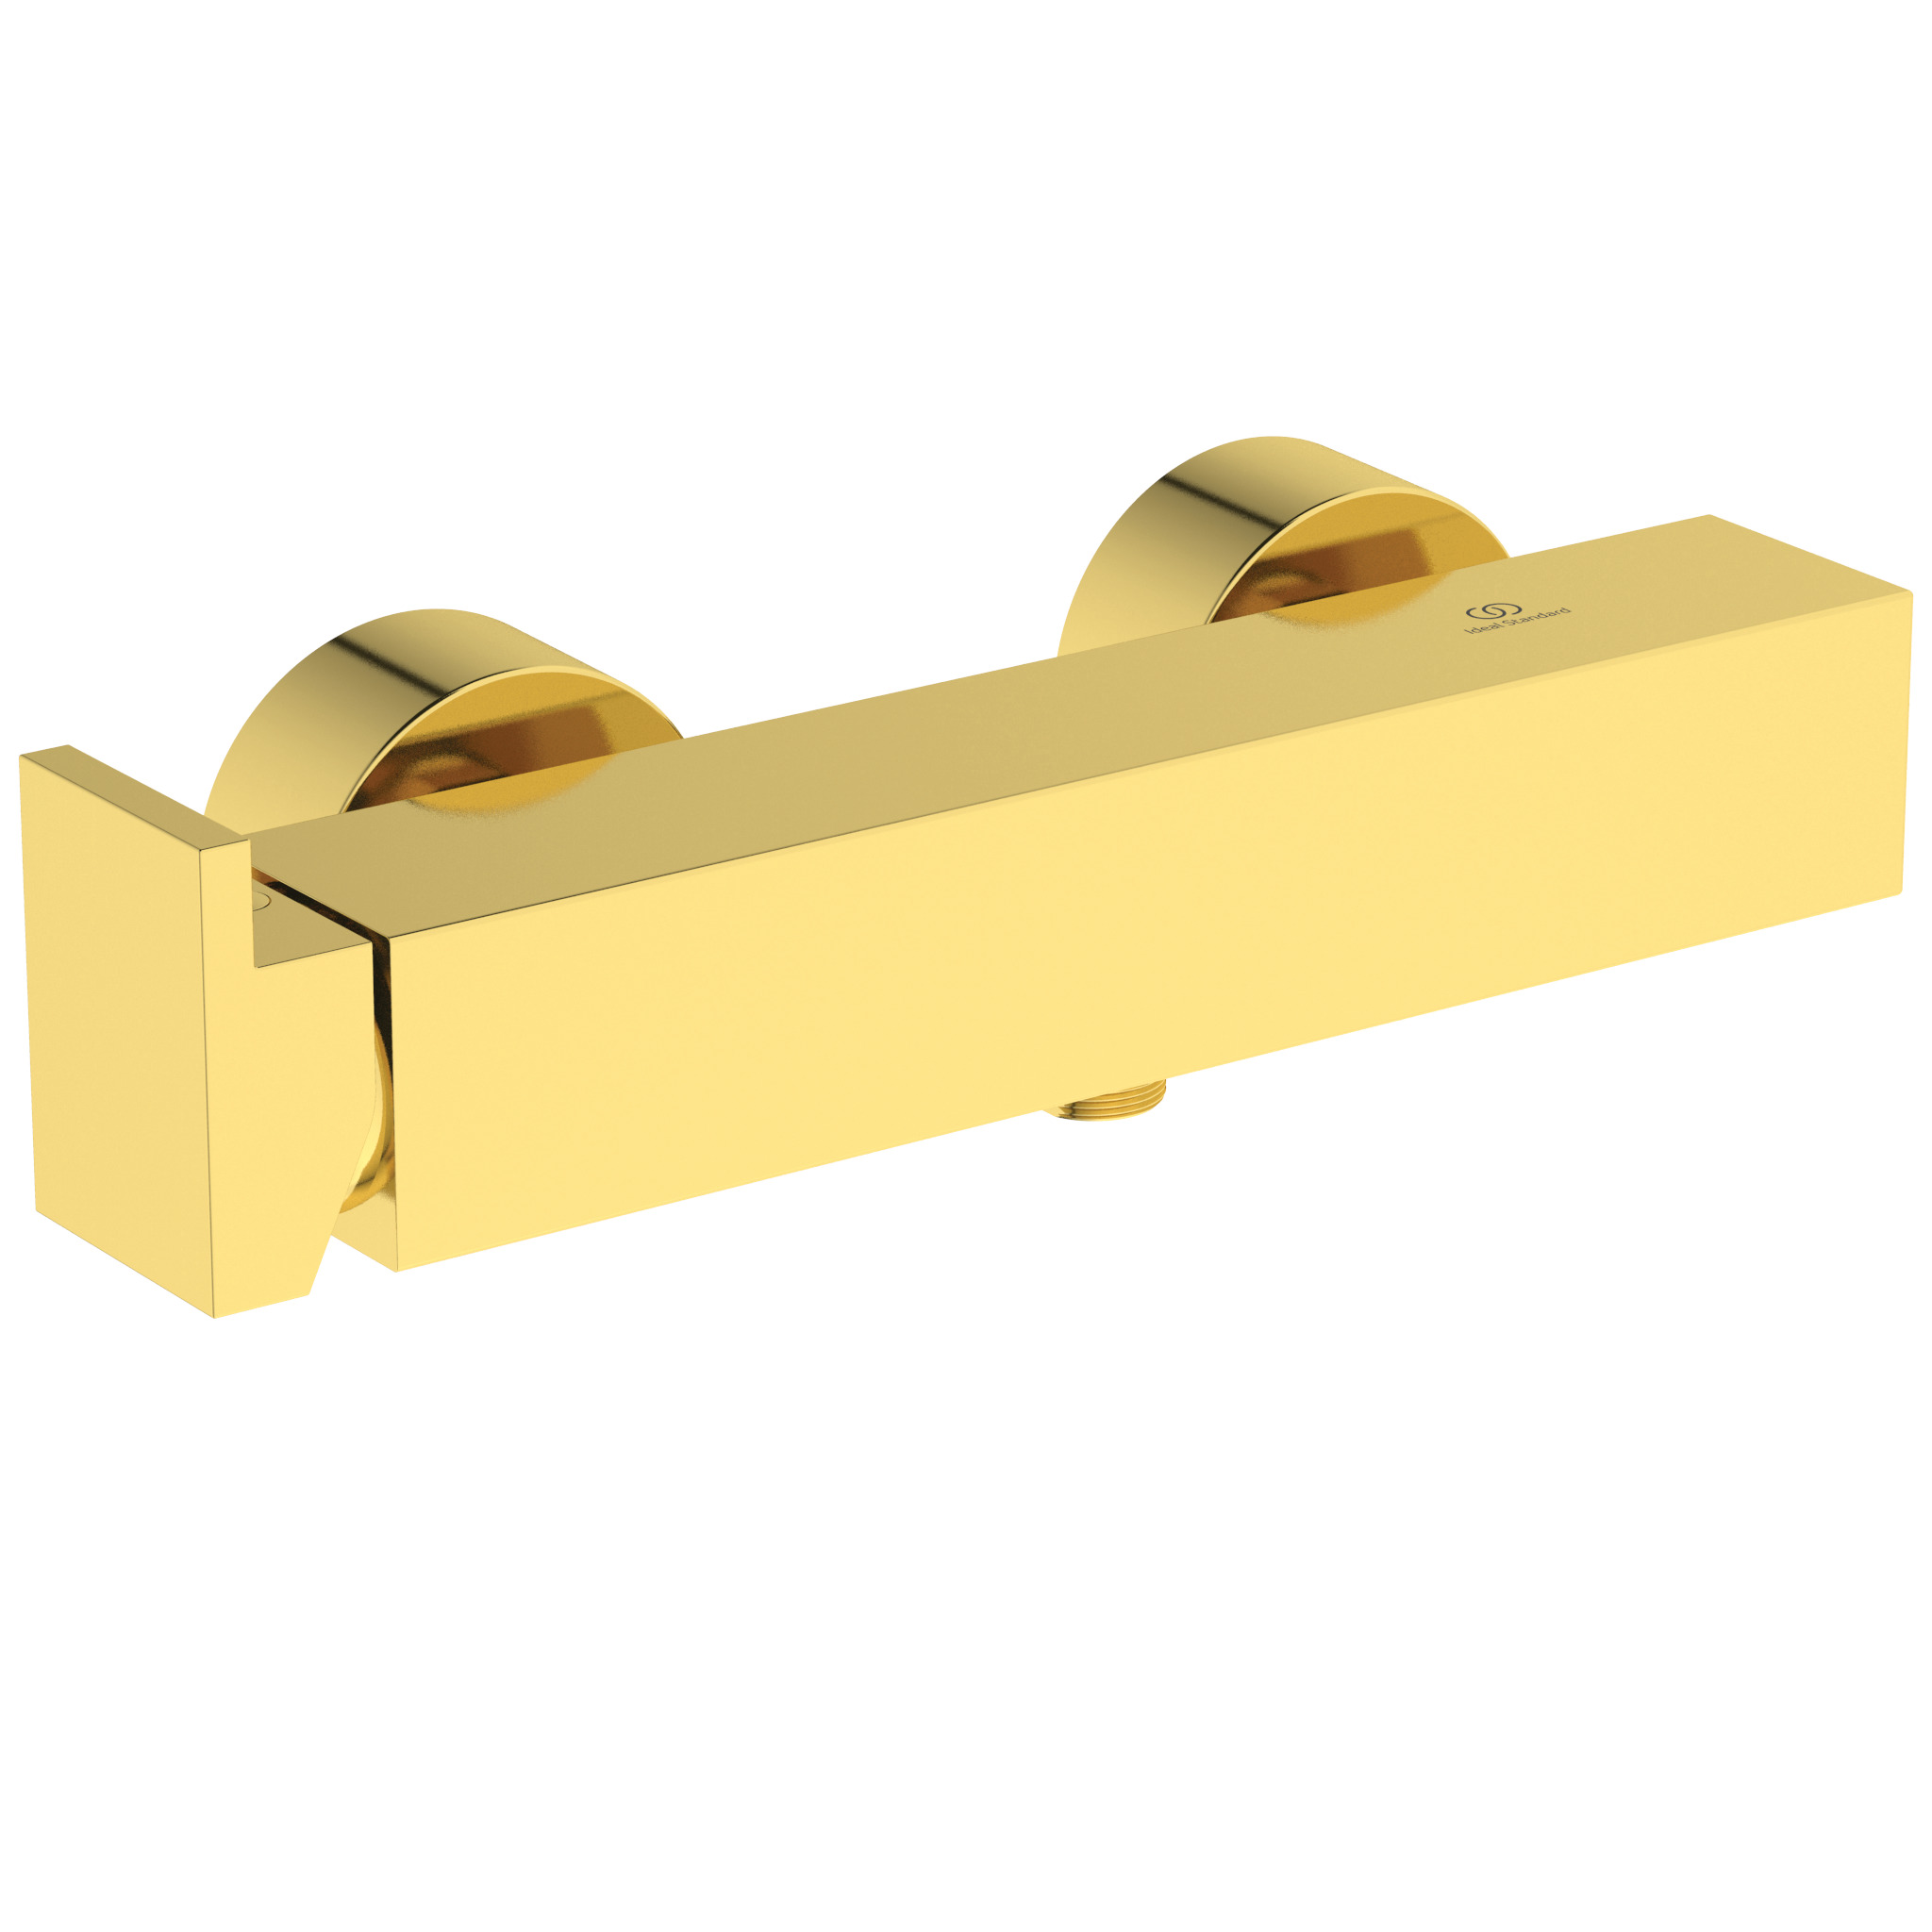 Baterie dus Ideal Standard Extra brushed gold baie imagine bricosteel.ro